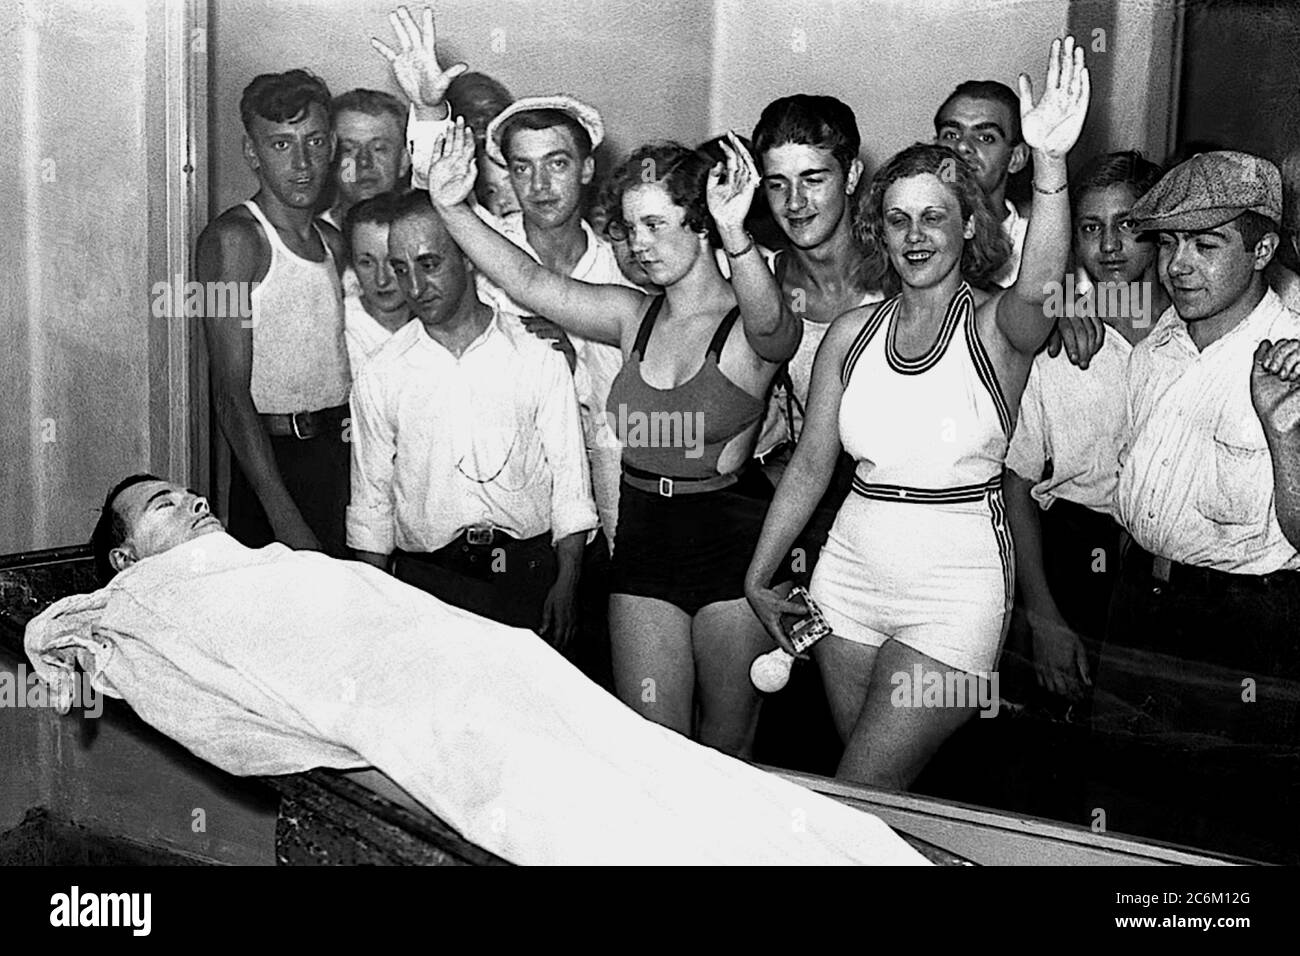 1934 , 22 july, CHICAGO , USA : The american gangster JOHN Herbert DILLINGER ( 1902 - 1934 ), killed by FBI the day 21 july during a fire fighting and exposed at Morgue to young people dress in swimsuit from Lake Michigan summer holidays . In this photo Betty and Rosella Nelson , along with a large crowd, view the body of John Dillinger at the Cook County Morgue , at Polk and Wood Streets, in Chicago . In the days after Dillinger was killed on July 22, 1934, massive crowds lined up outside the morgue to get a glimpse of the notorious public enemy .- CRIMINE - CRIMINALE - CRIME - ASSASSINO - CR Stock Photo